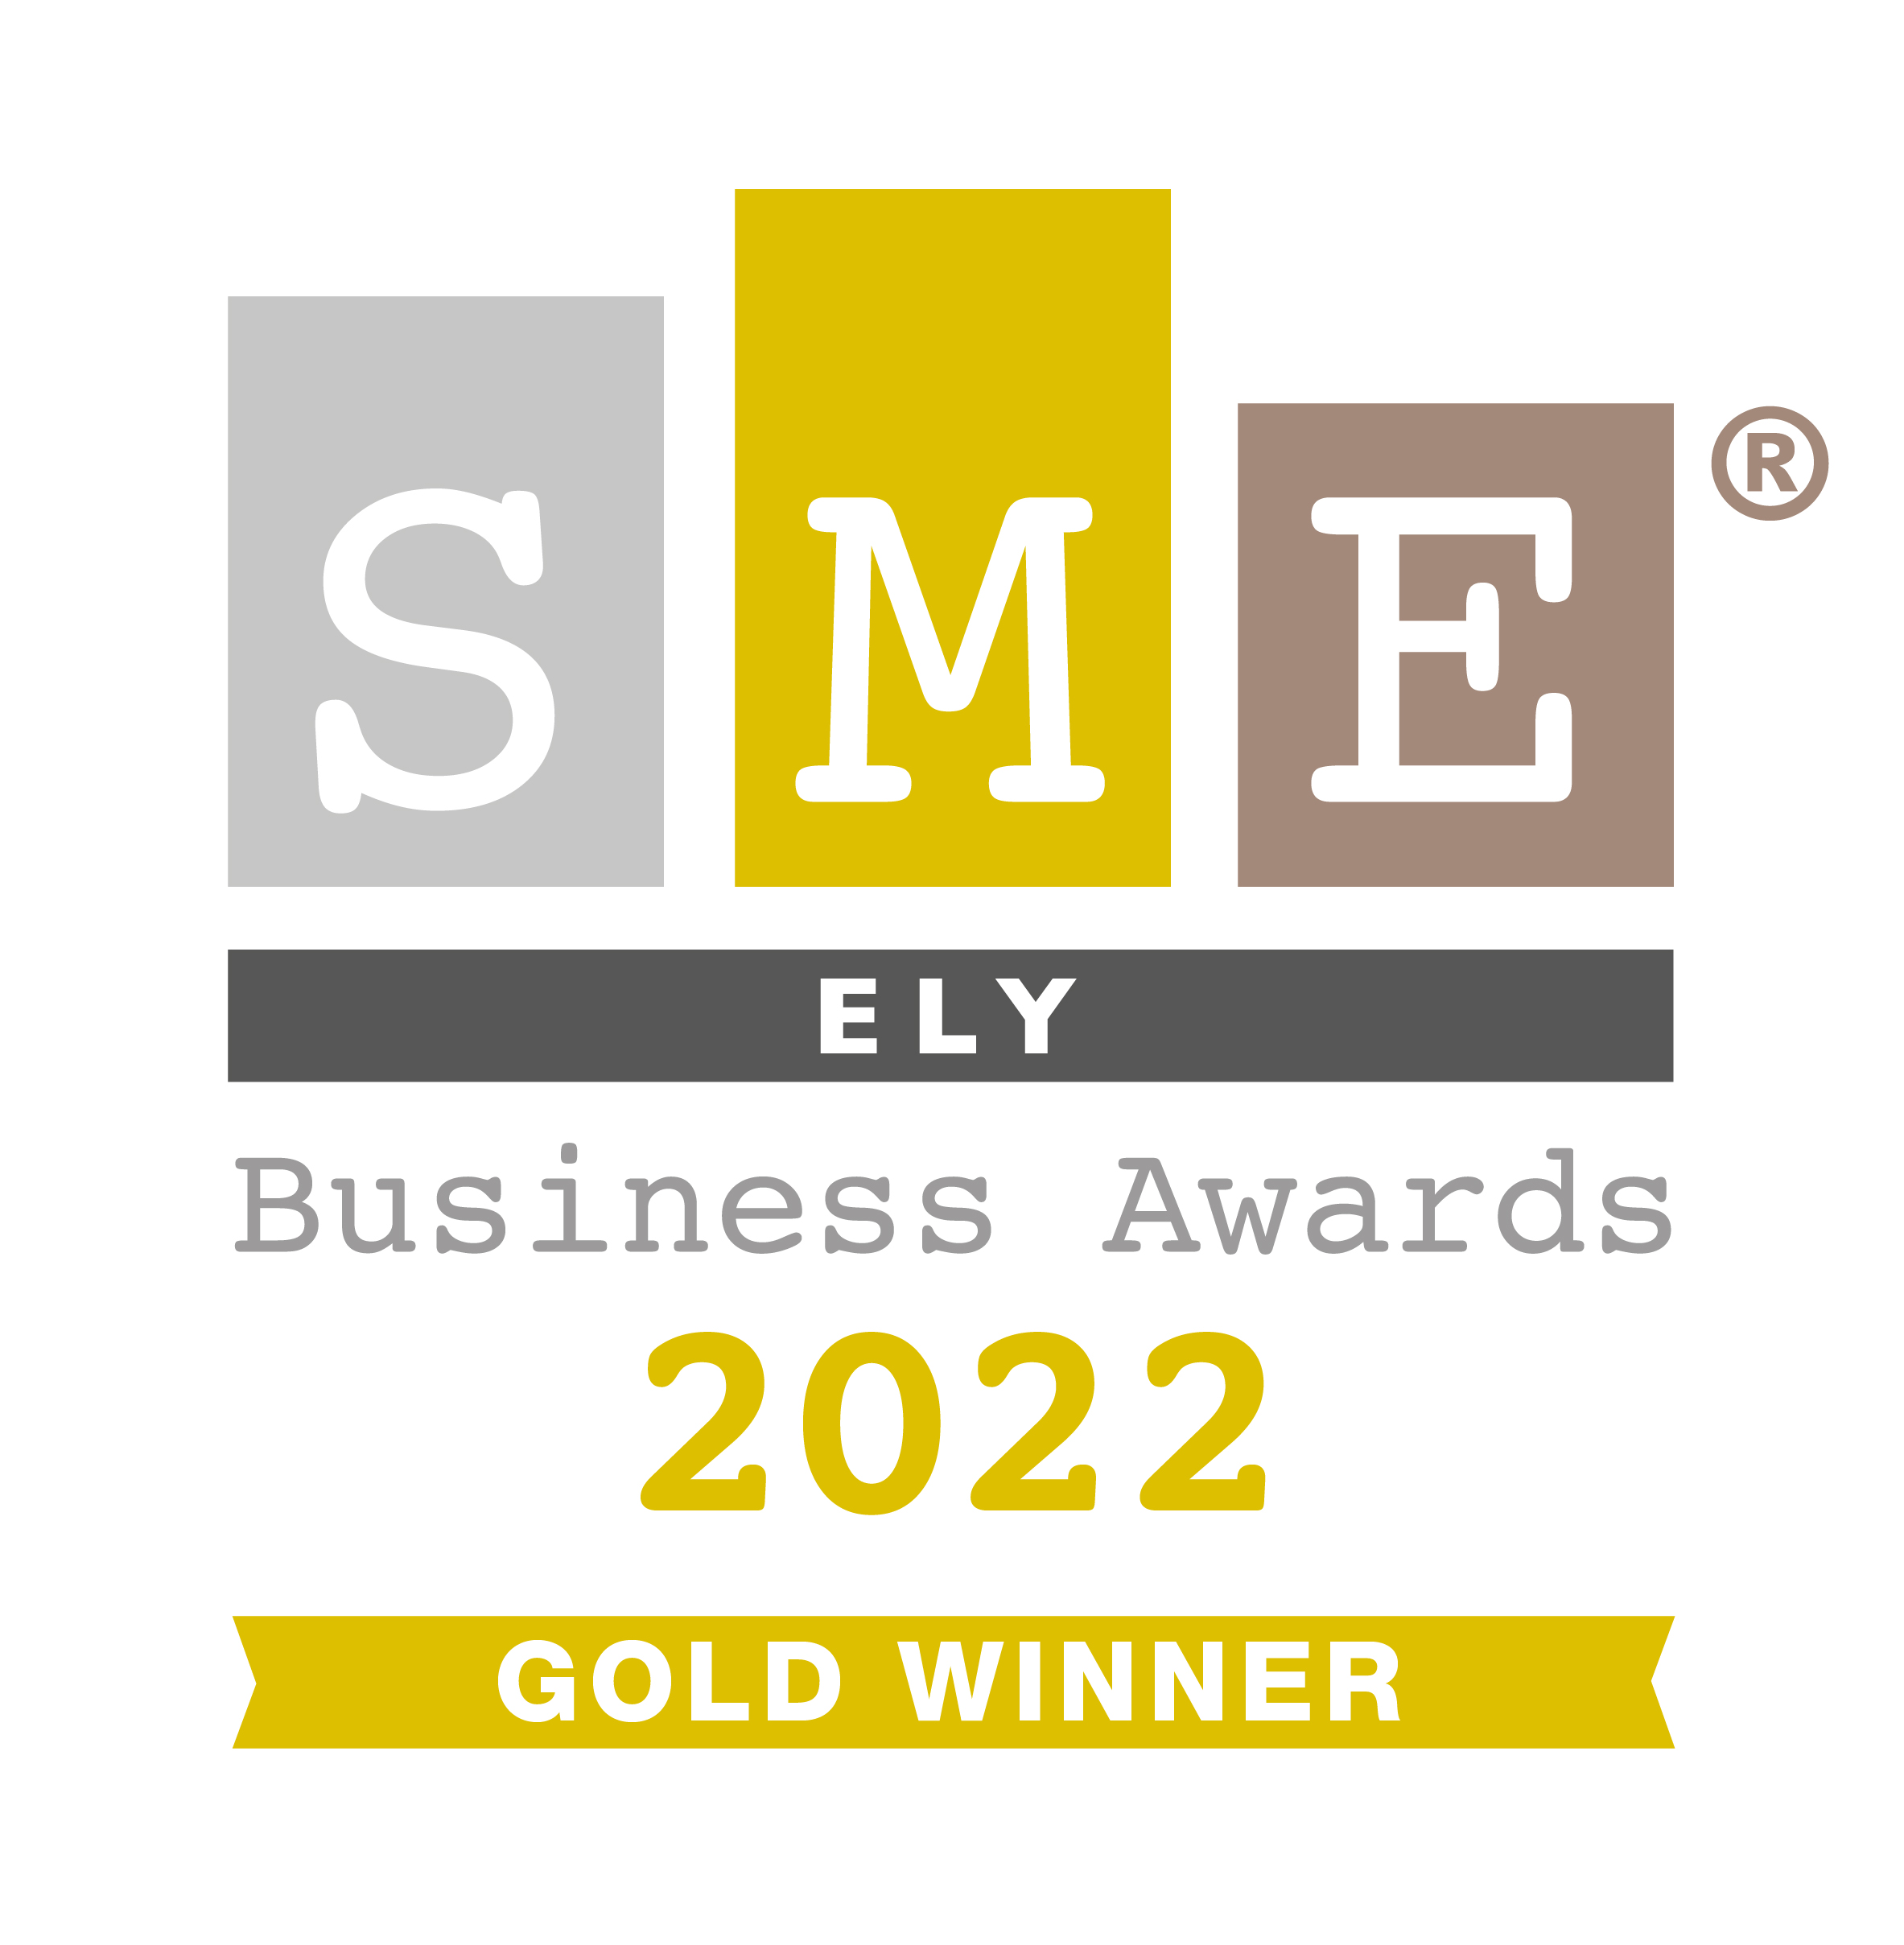 Ely Business awards Gold Winner for Service Excellence